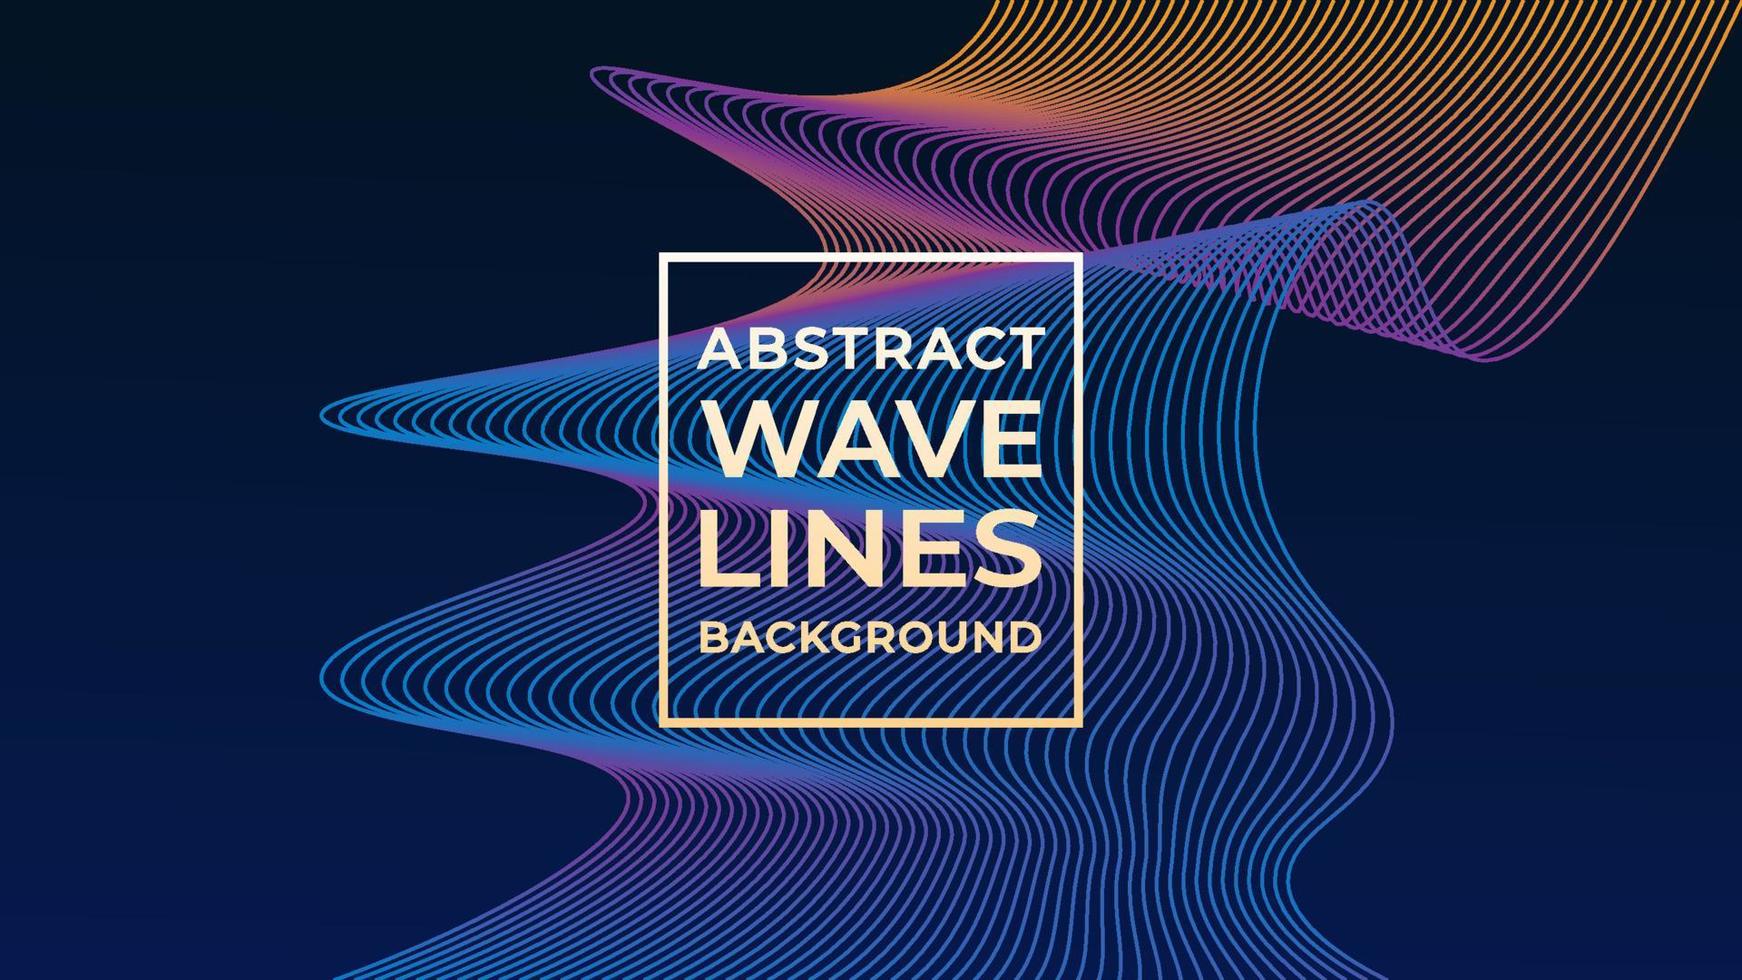 Abstract Wave Line Background Design Vector, Dark Blue, Colorful Sound Wave vector